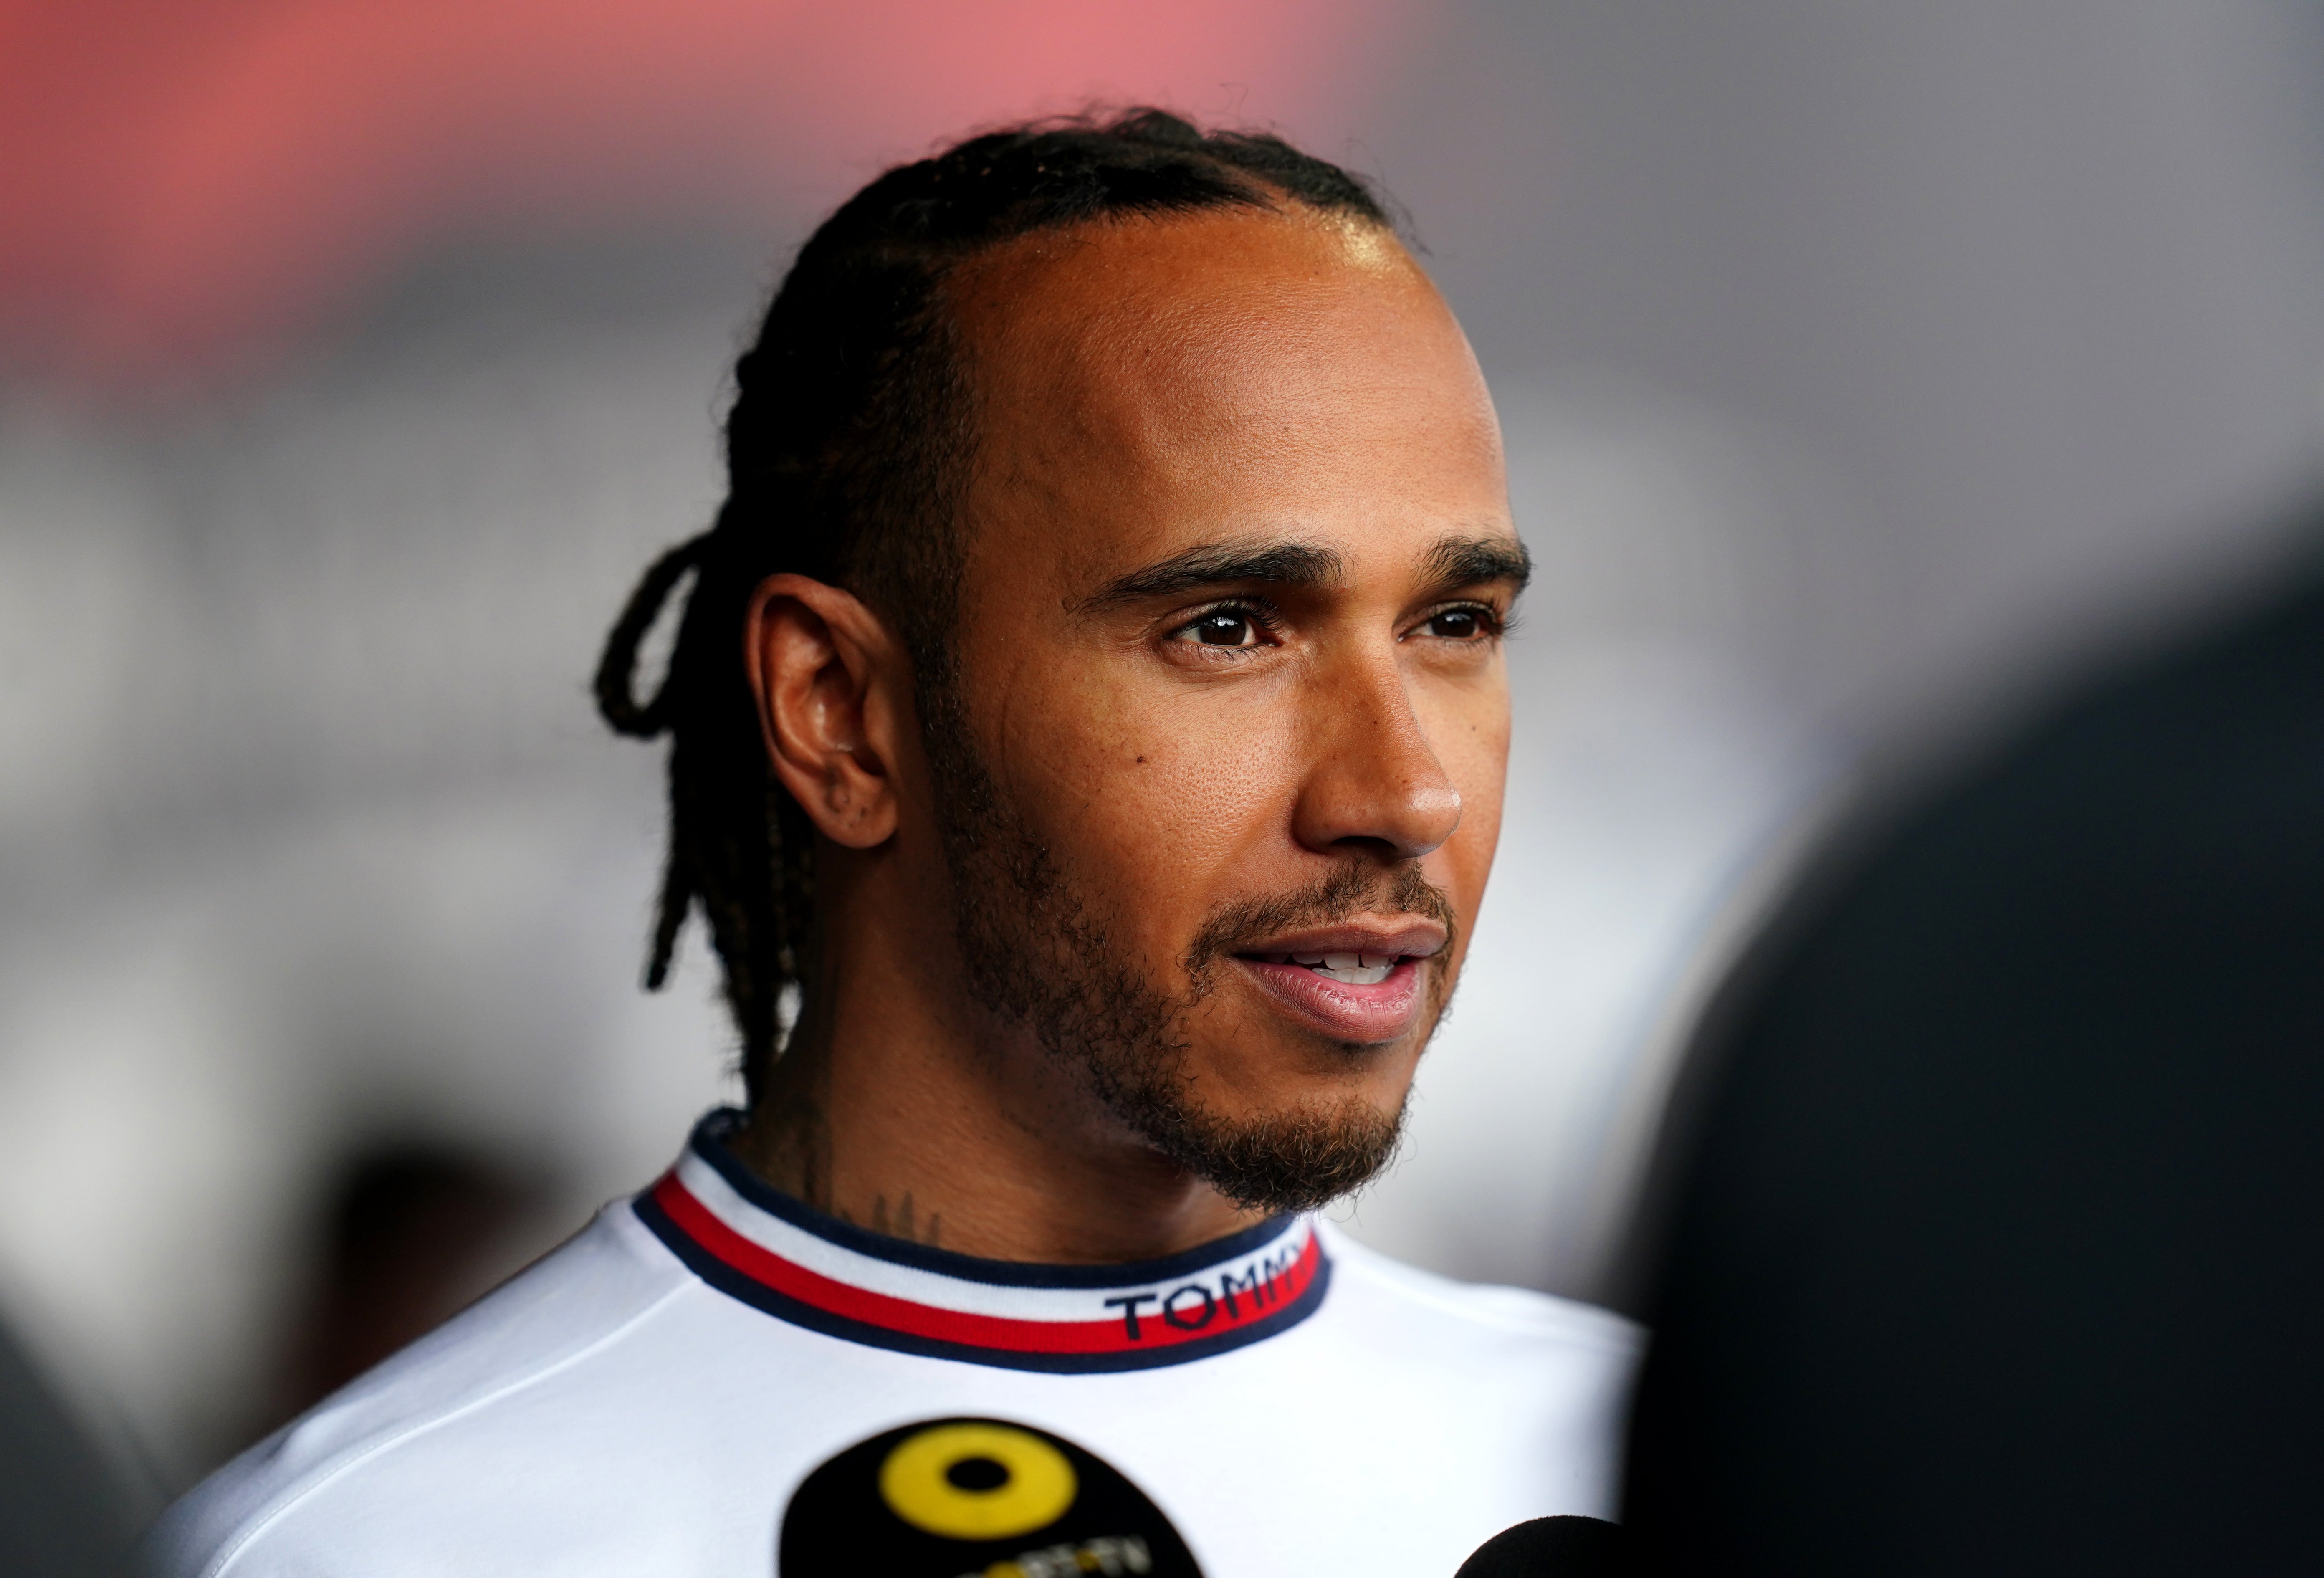 Lewis Hamilton says you can’t argue with safety improvements (David Davies/PA)